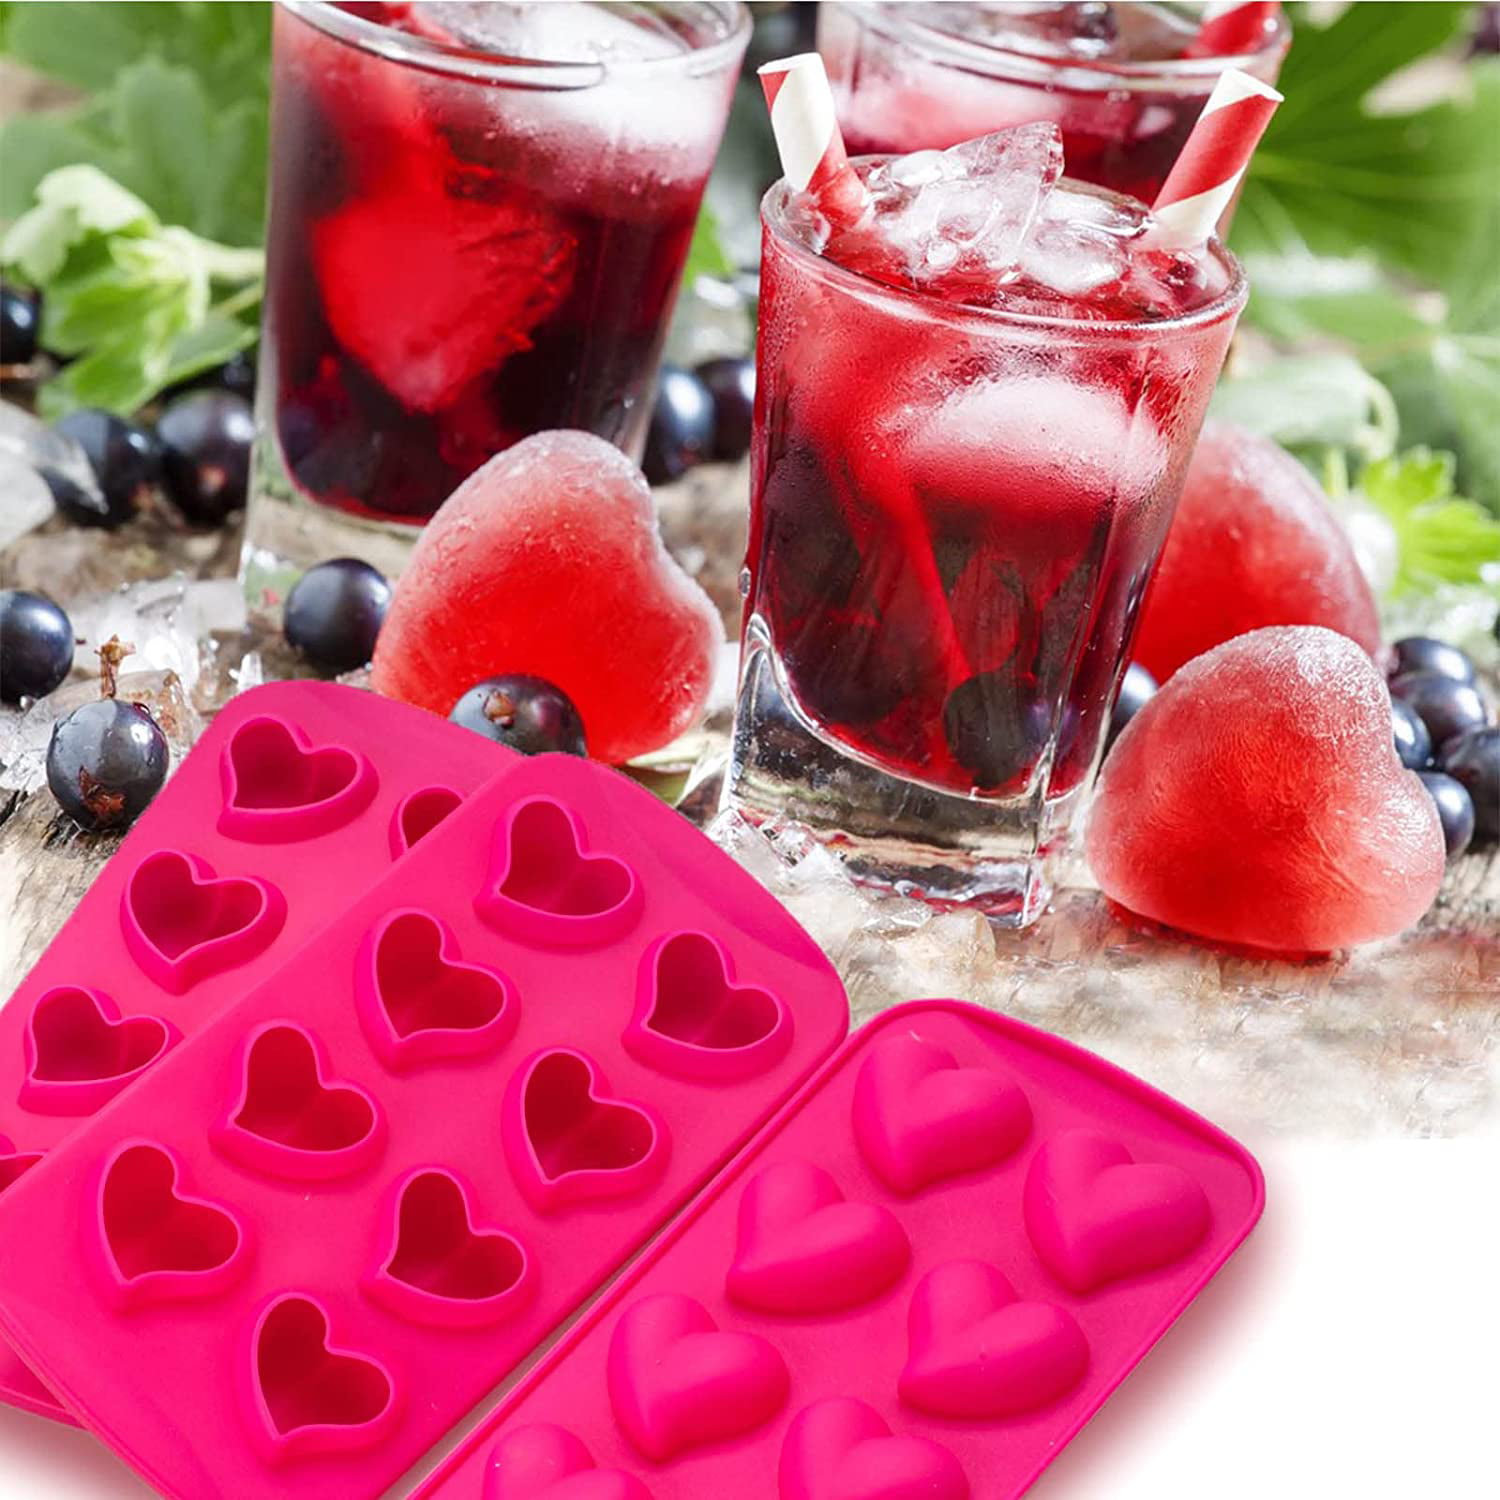 [1Pack] 6-Large 3 Heart Shaped Ice Cube Mold Tray | Fun Silicone Molds for Baking and Freezing: Chocolate, Biscuits, Gummies | BPA Free | Cute